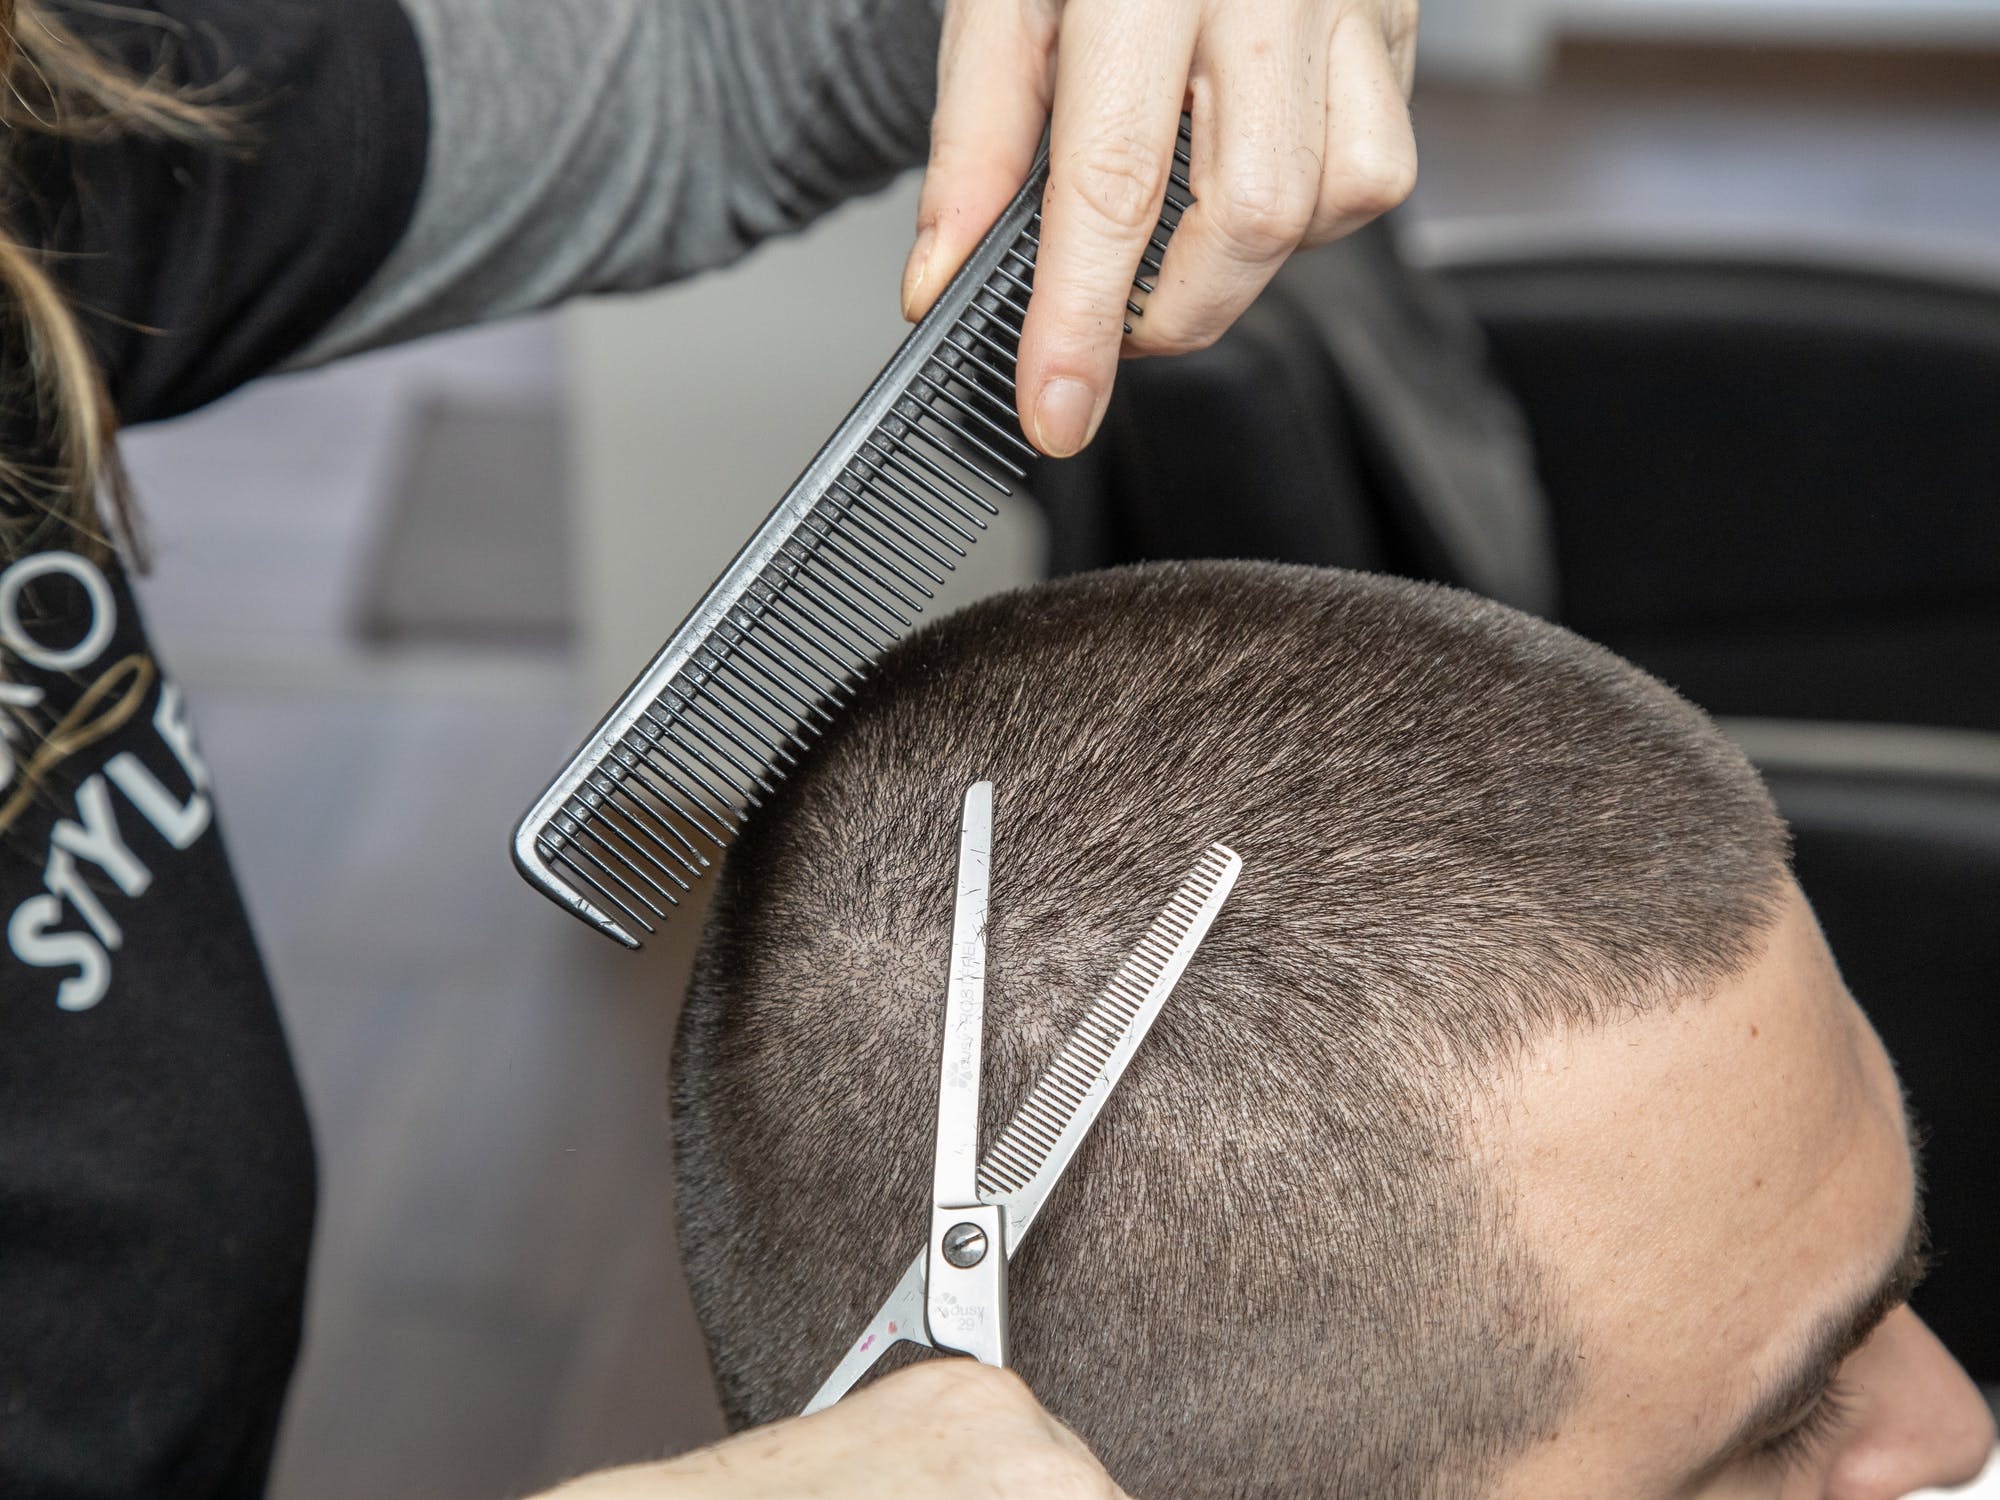 A grooming professional cutting a client's hair with shears.